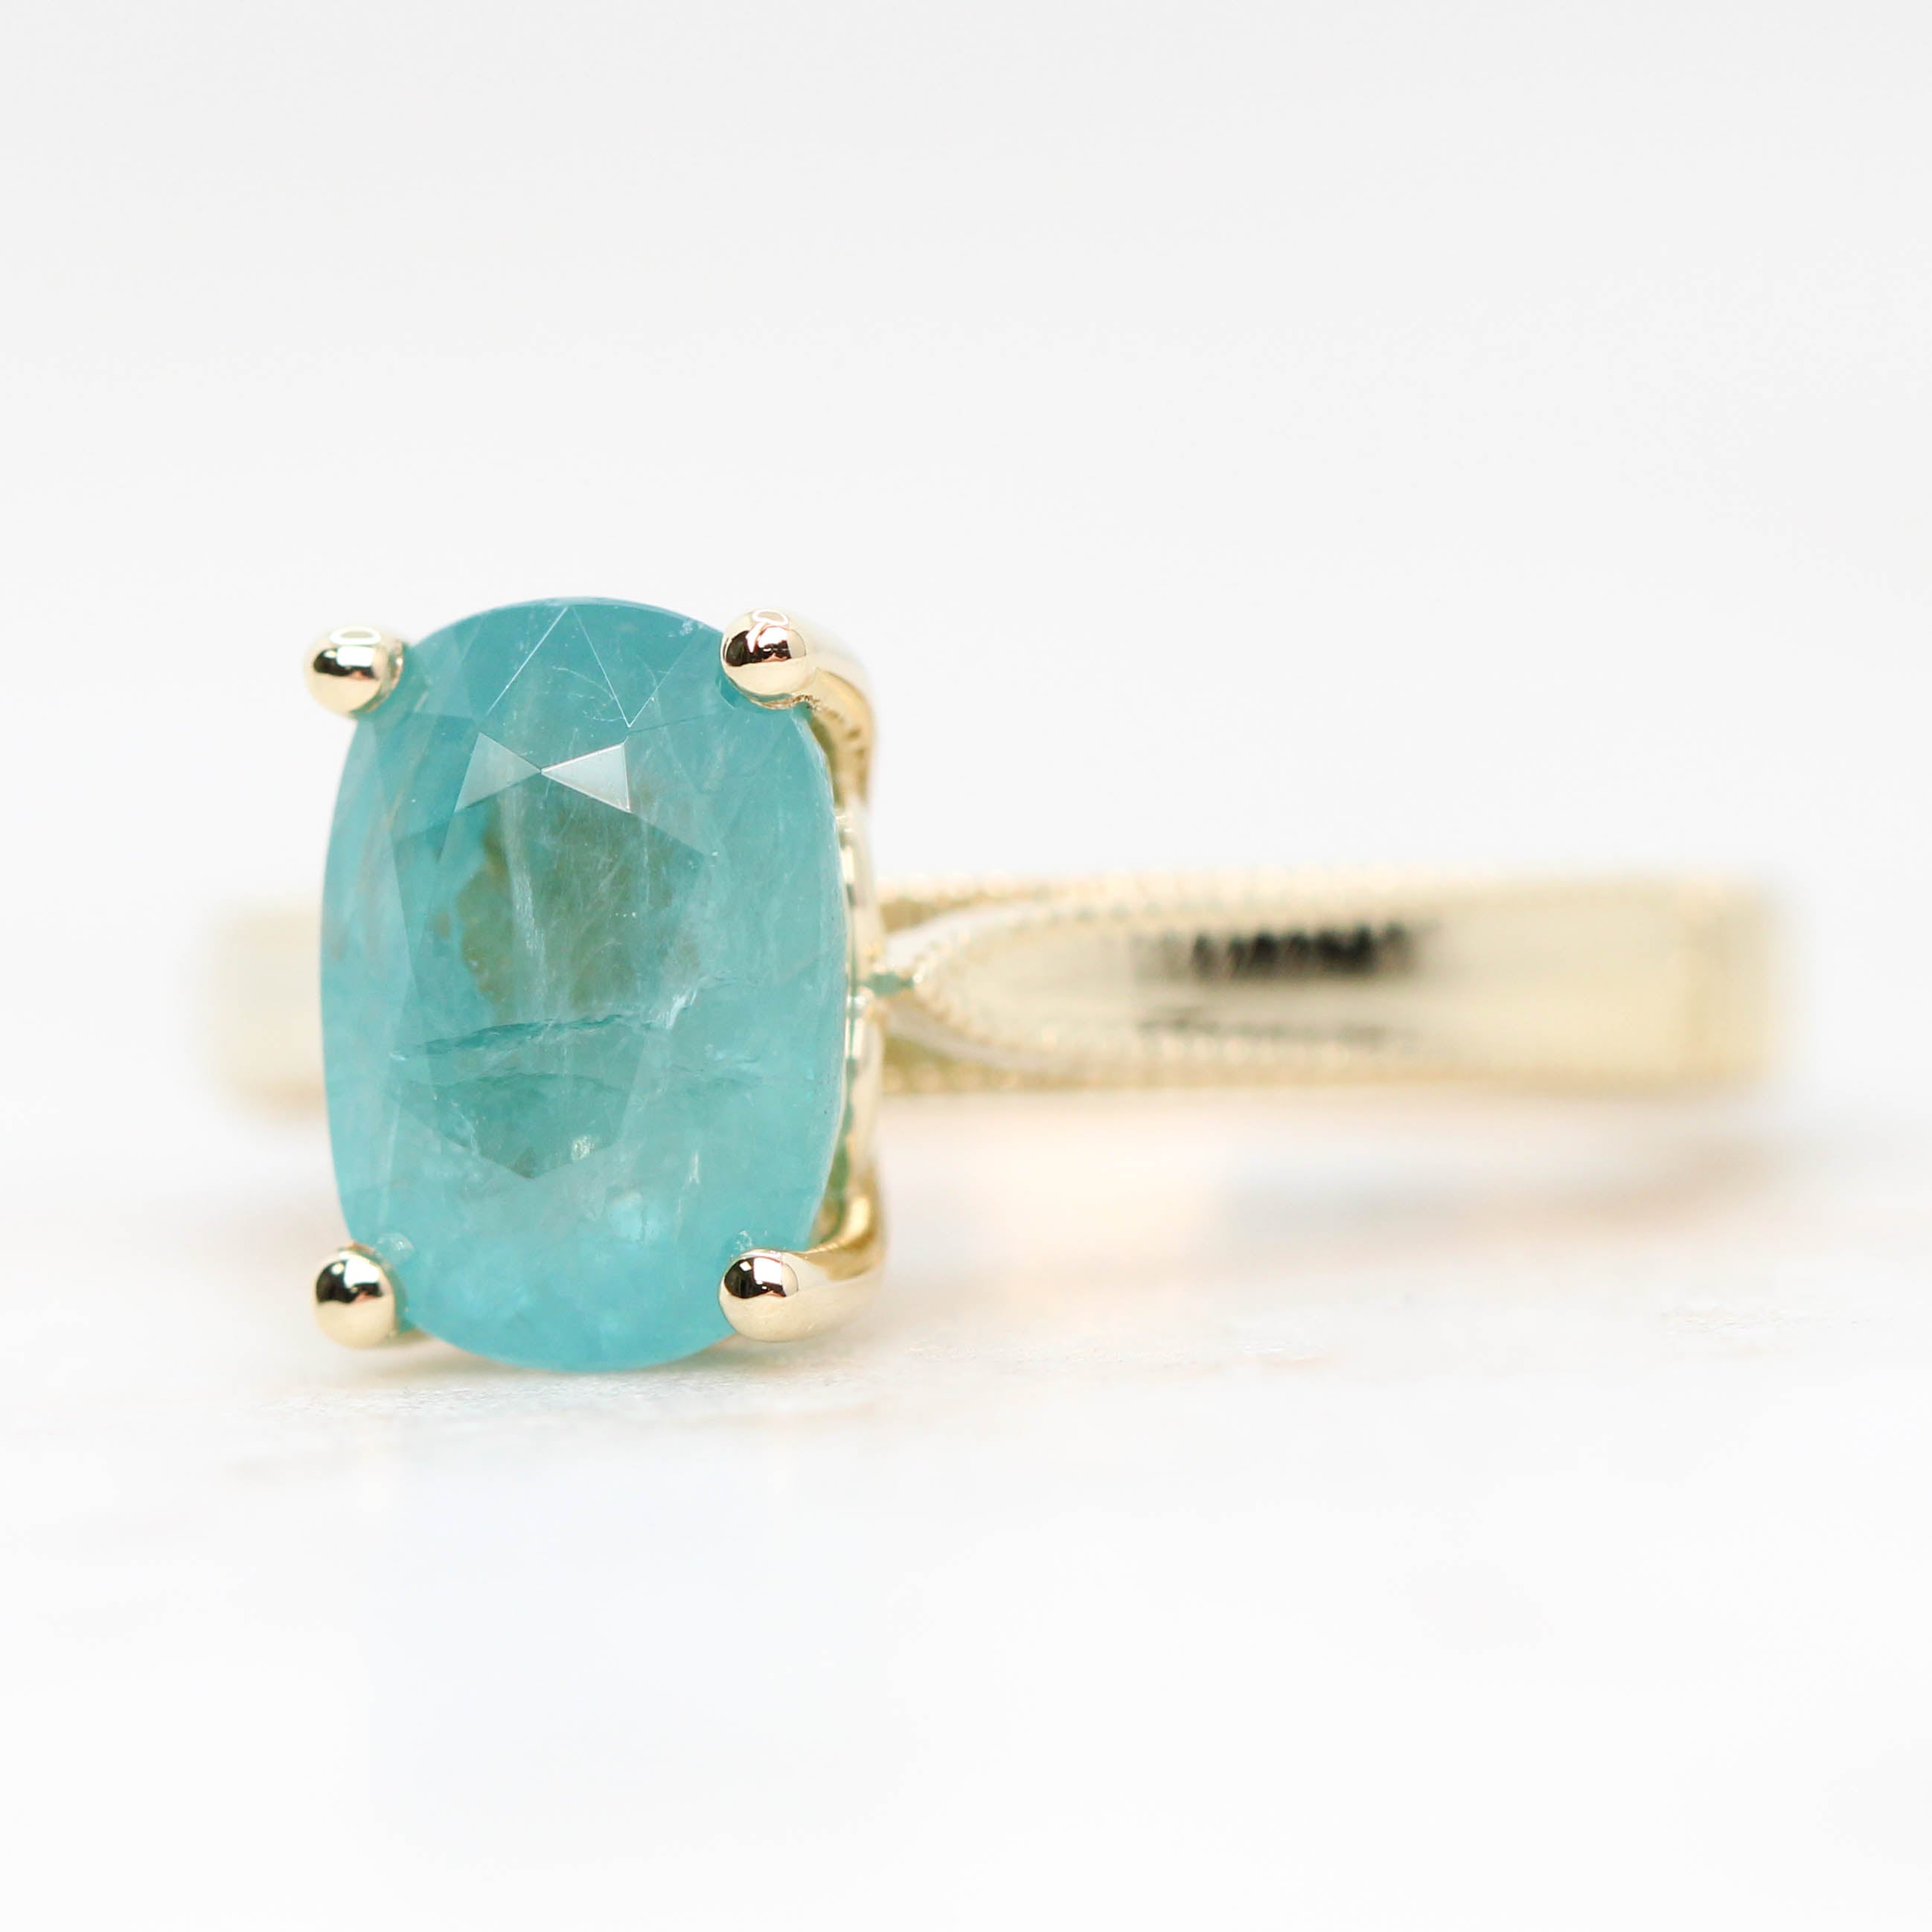 Jane Ring with a 3.22 Carat Teal Oval Grandidierite in 14k Yellow Gold - Ready to Size and Ship - Midwinter Co. Alternative Bridal Rings and Modern Fine Jewelry